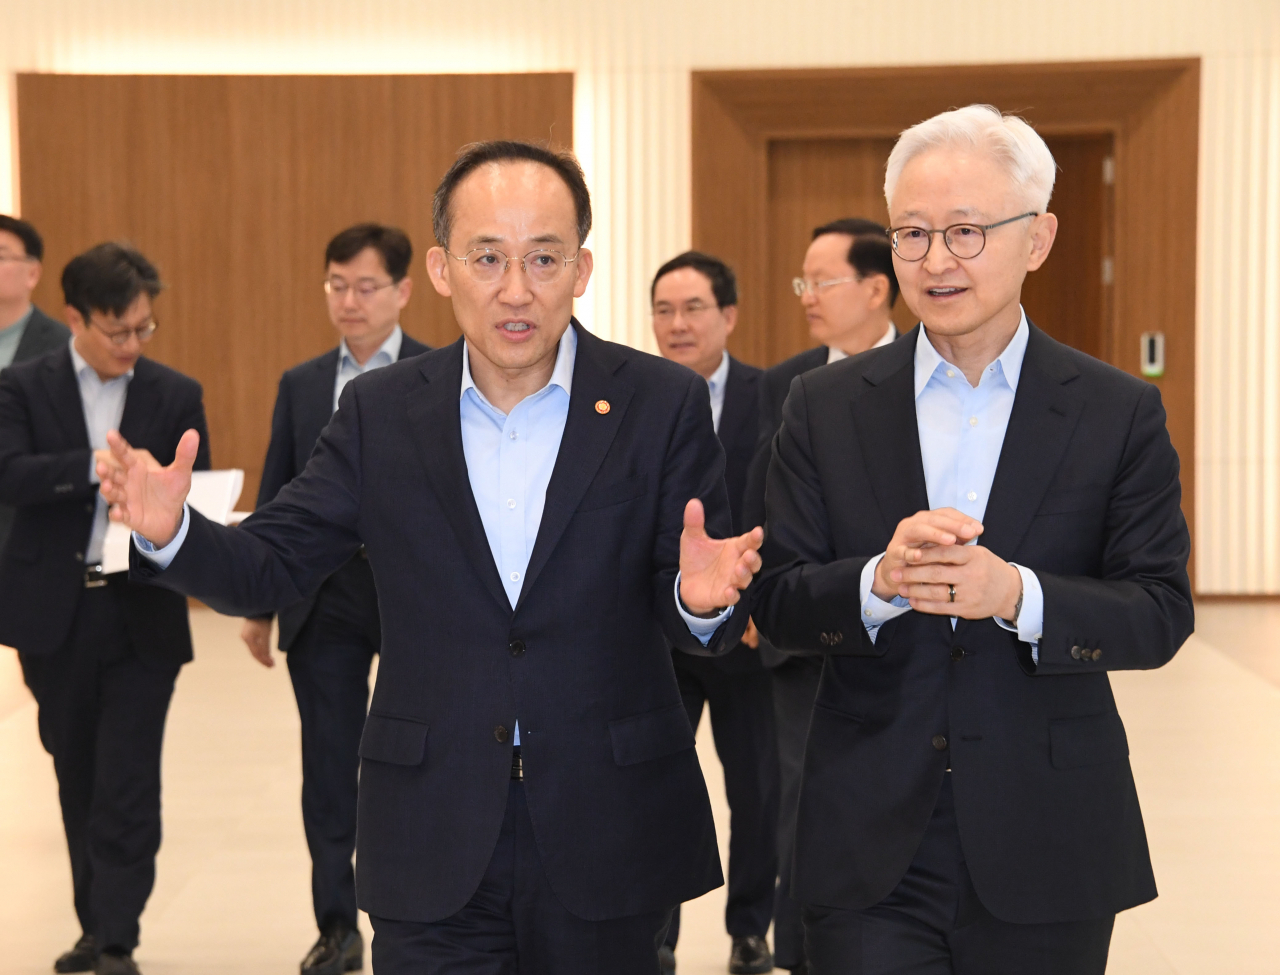 Samsung Electronics CEO Kyung Kye-hyun (right), in charge of the tech giant’s Device Solutions Division, speaks with Minister of Economy and Finance Choo Kyung-ho as they participate an event held at Samsung's Pyeongtaek campus, Gyeonggi Province, on April 7. (Yonhap)